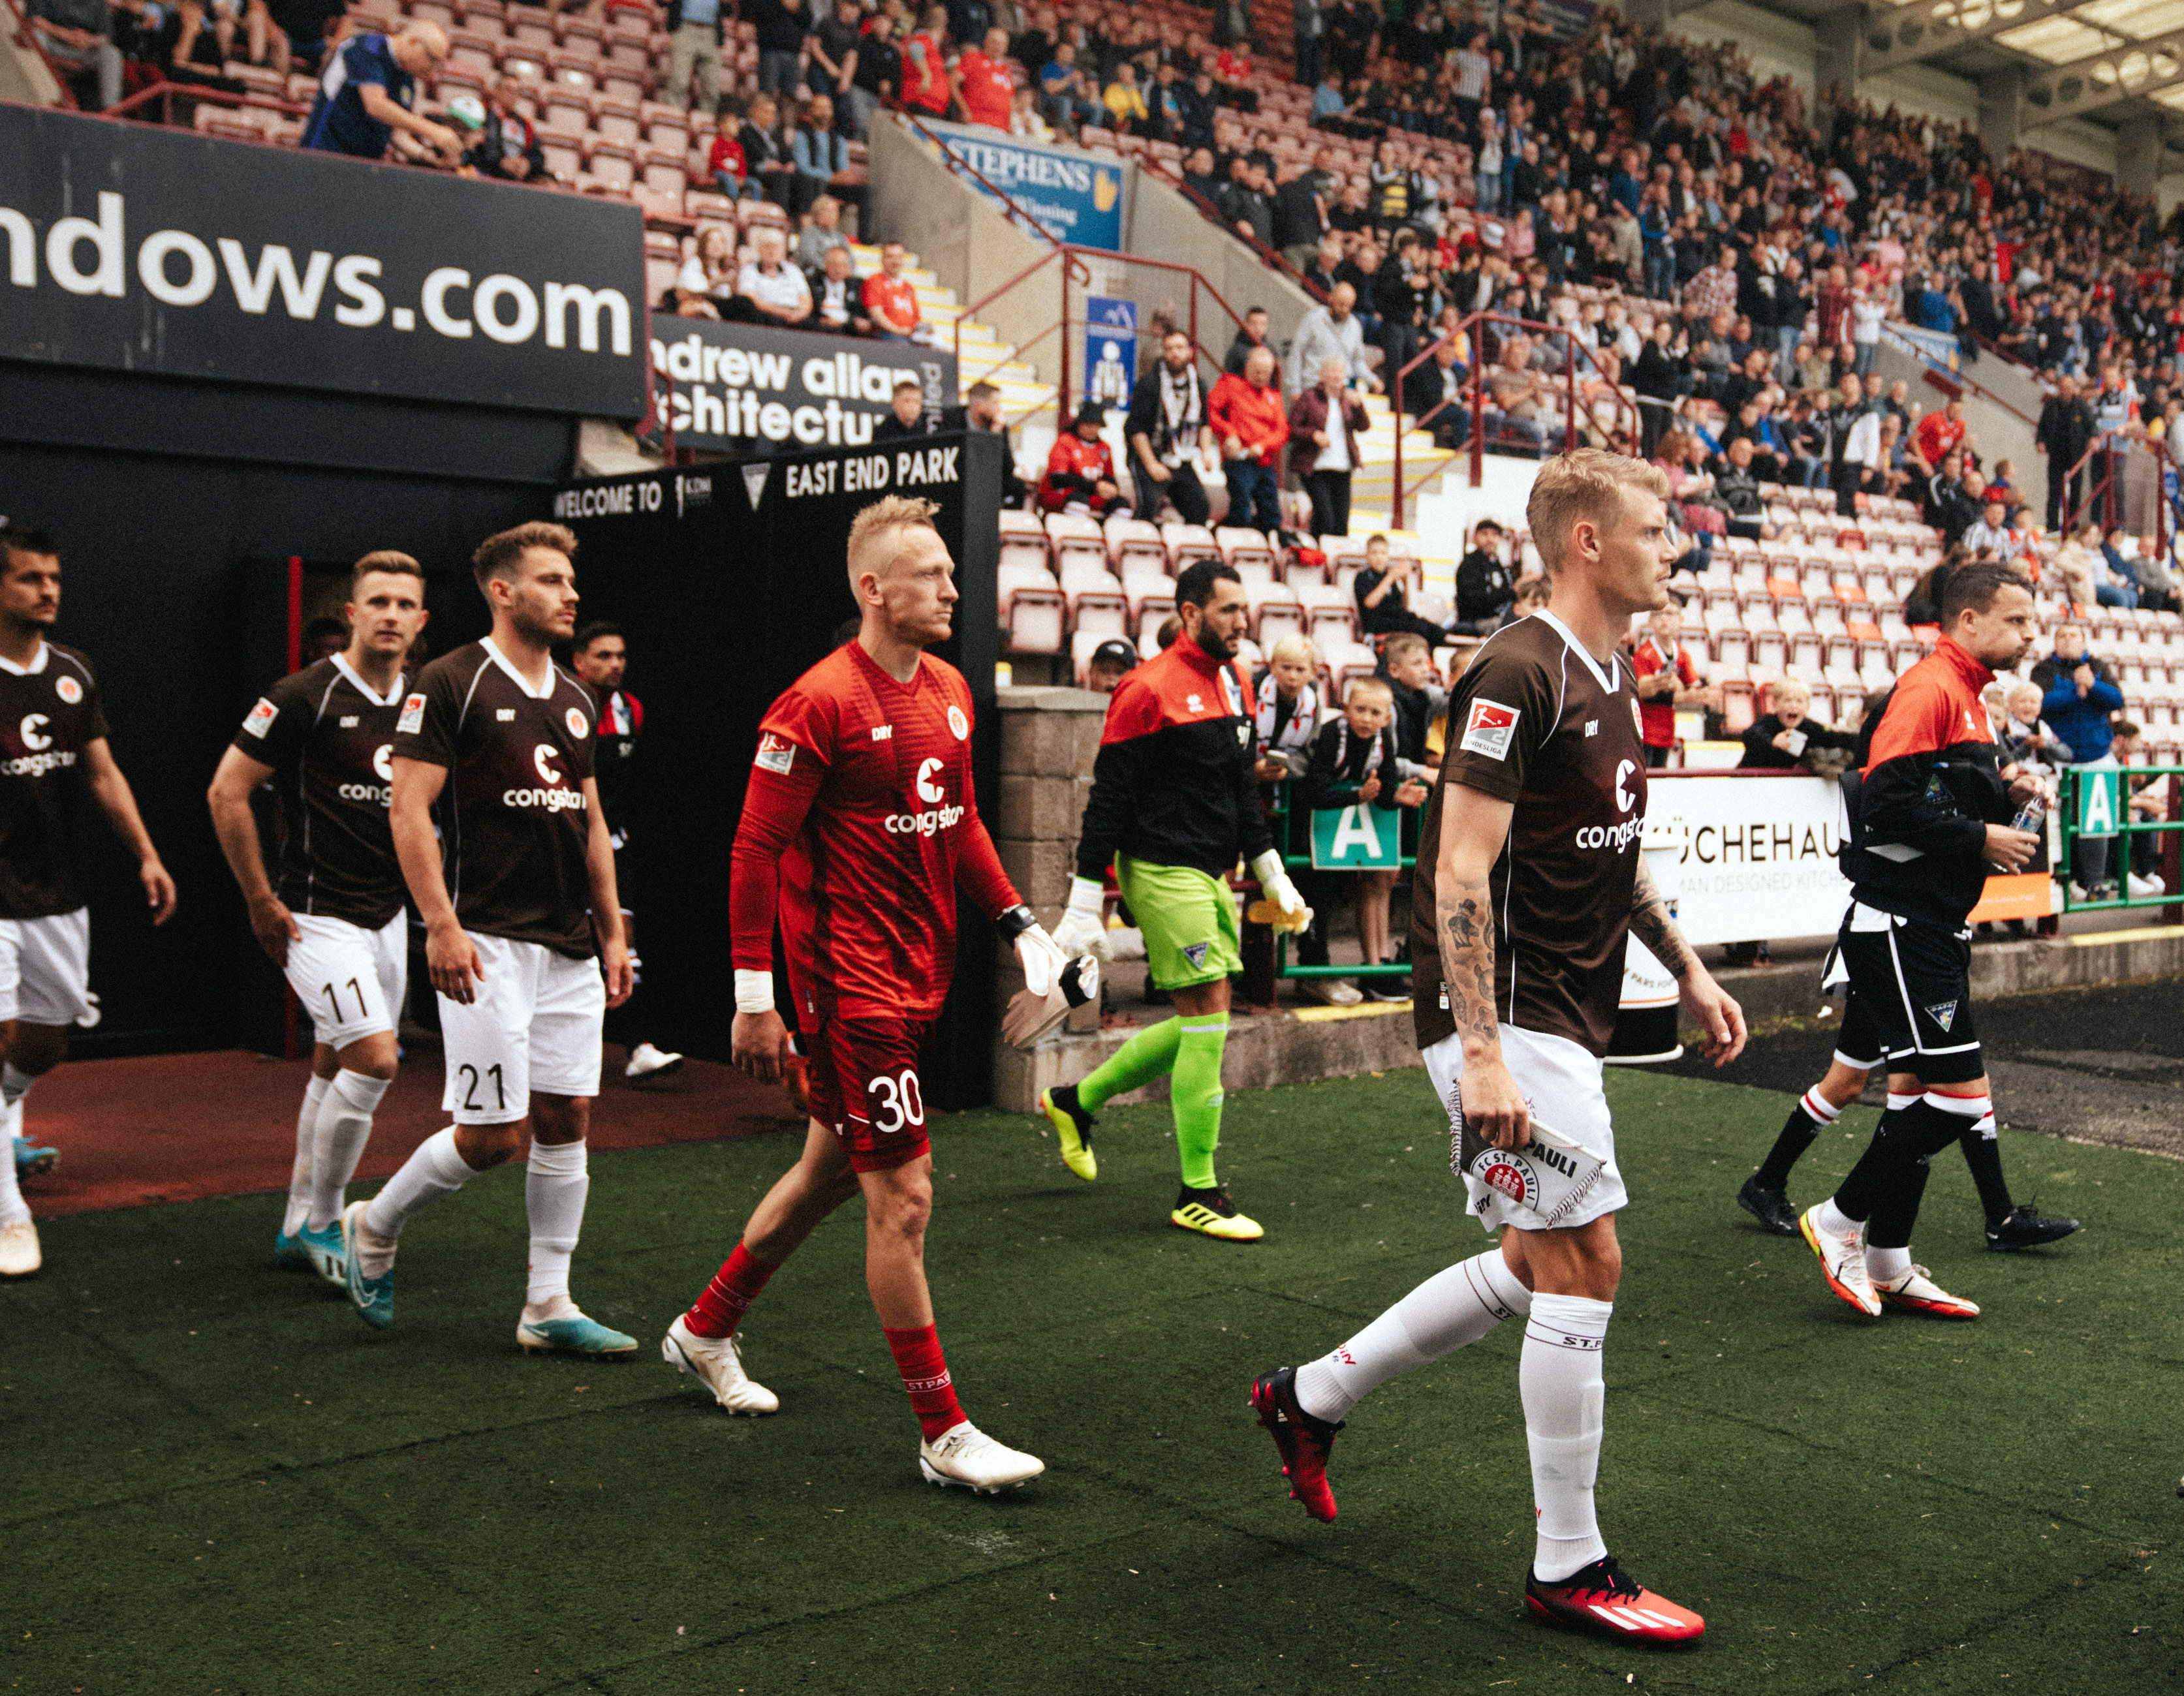 Sascha Burchert takes to the field with his teammates against Dunfermline.